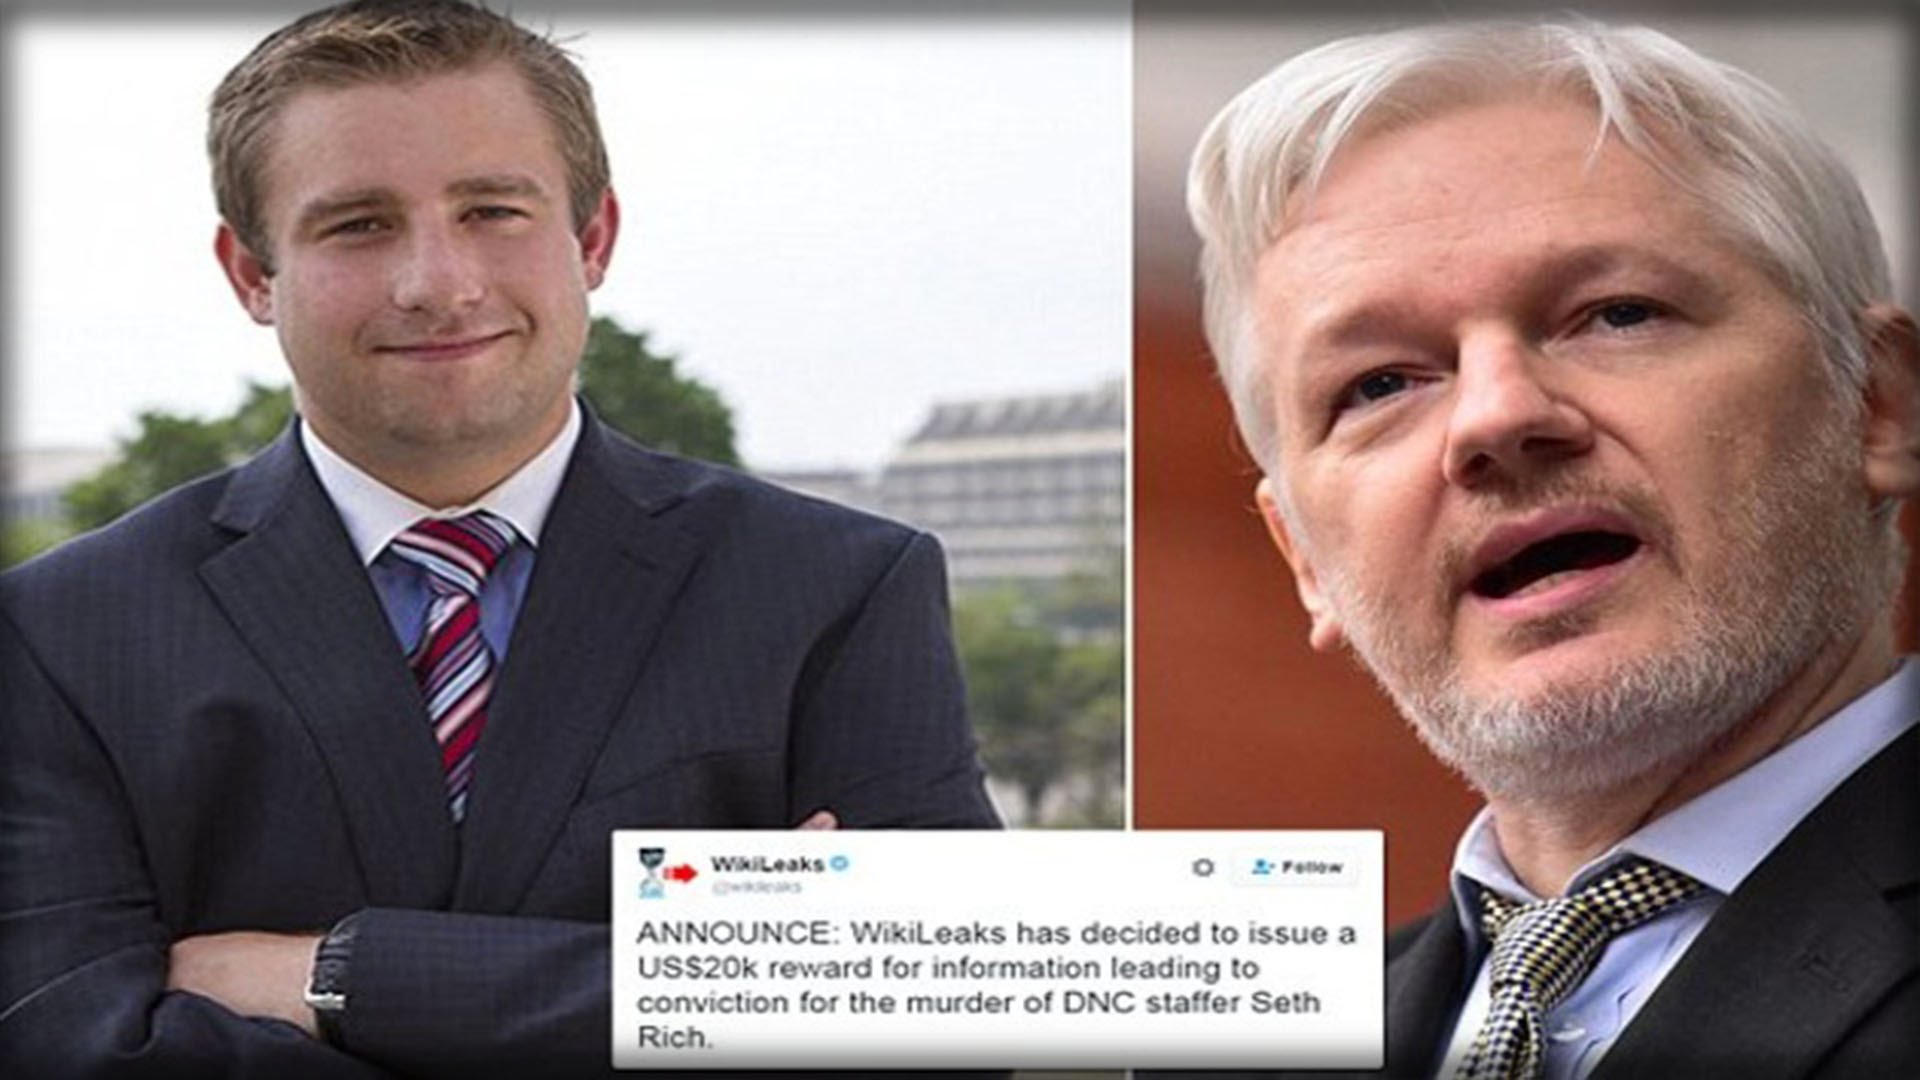 Who Is Lying About The Murder Of Seth Rich?